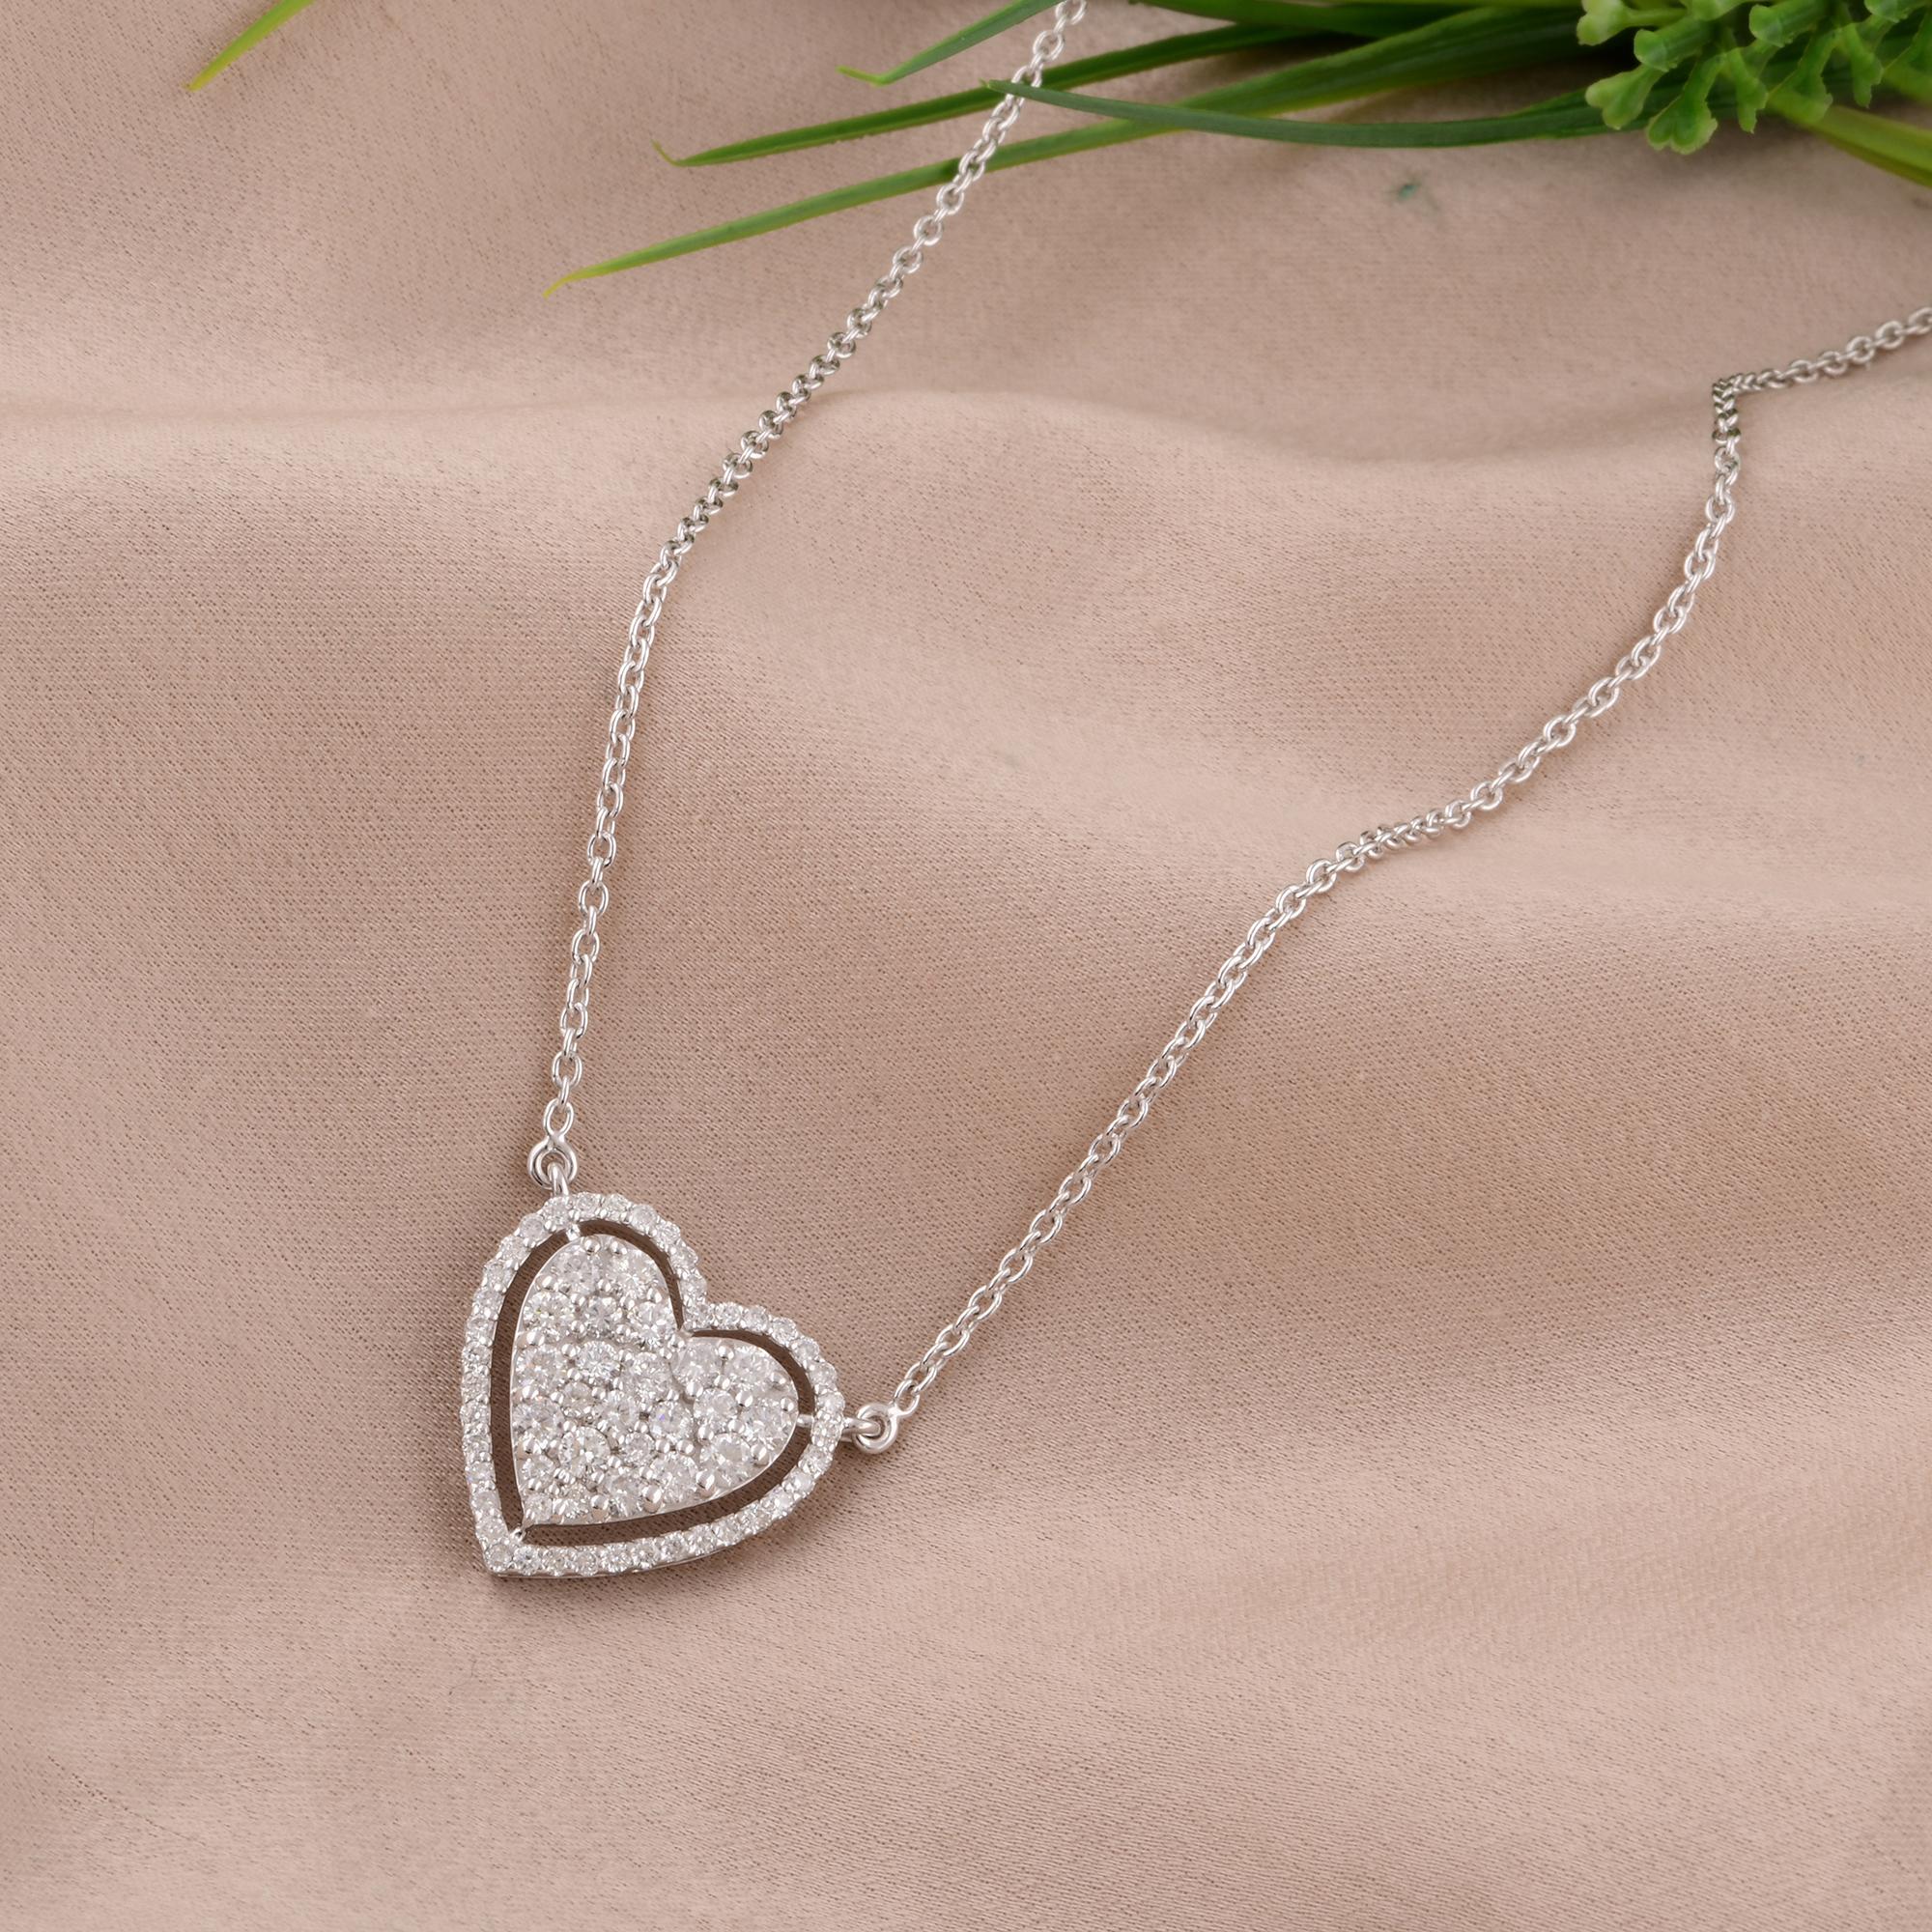 Modern Natural 1.31 Carat Diamond Pave Heart Charm Necklace 18 Karat White Gold Jewelry For Sale